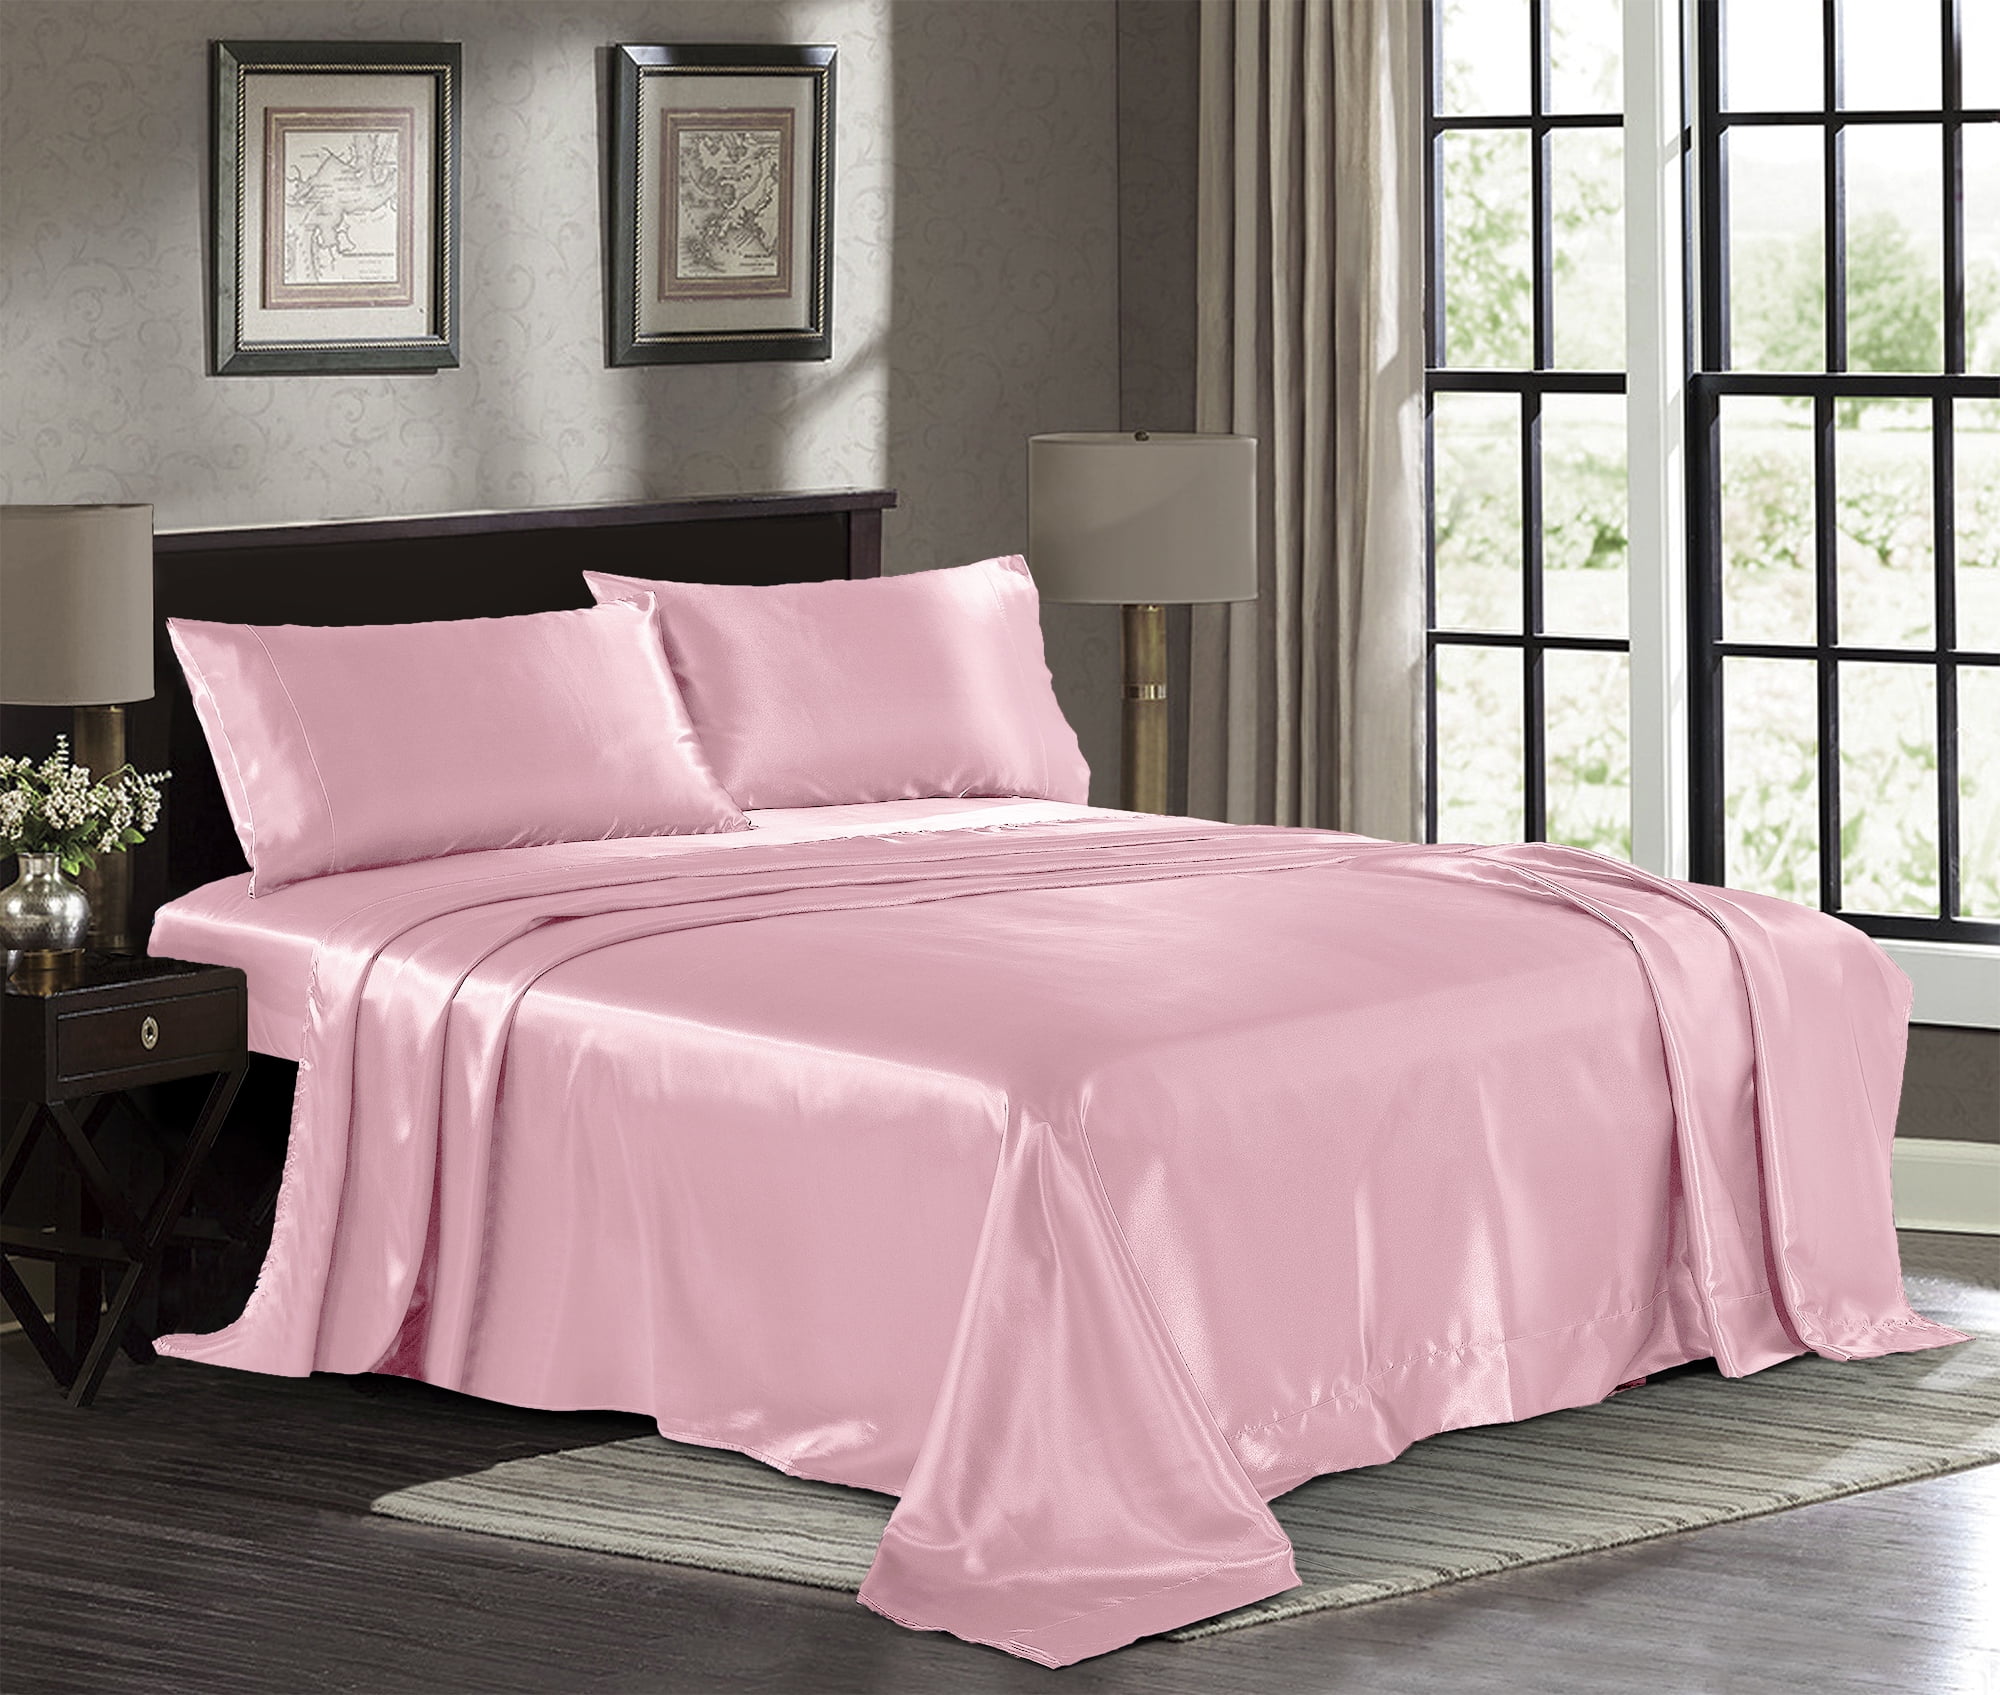 Satin Sheets California King Piece Pink Luxury Silky Bed Sheets